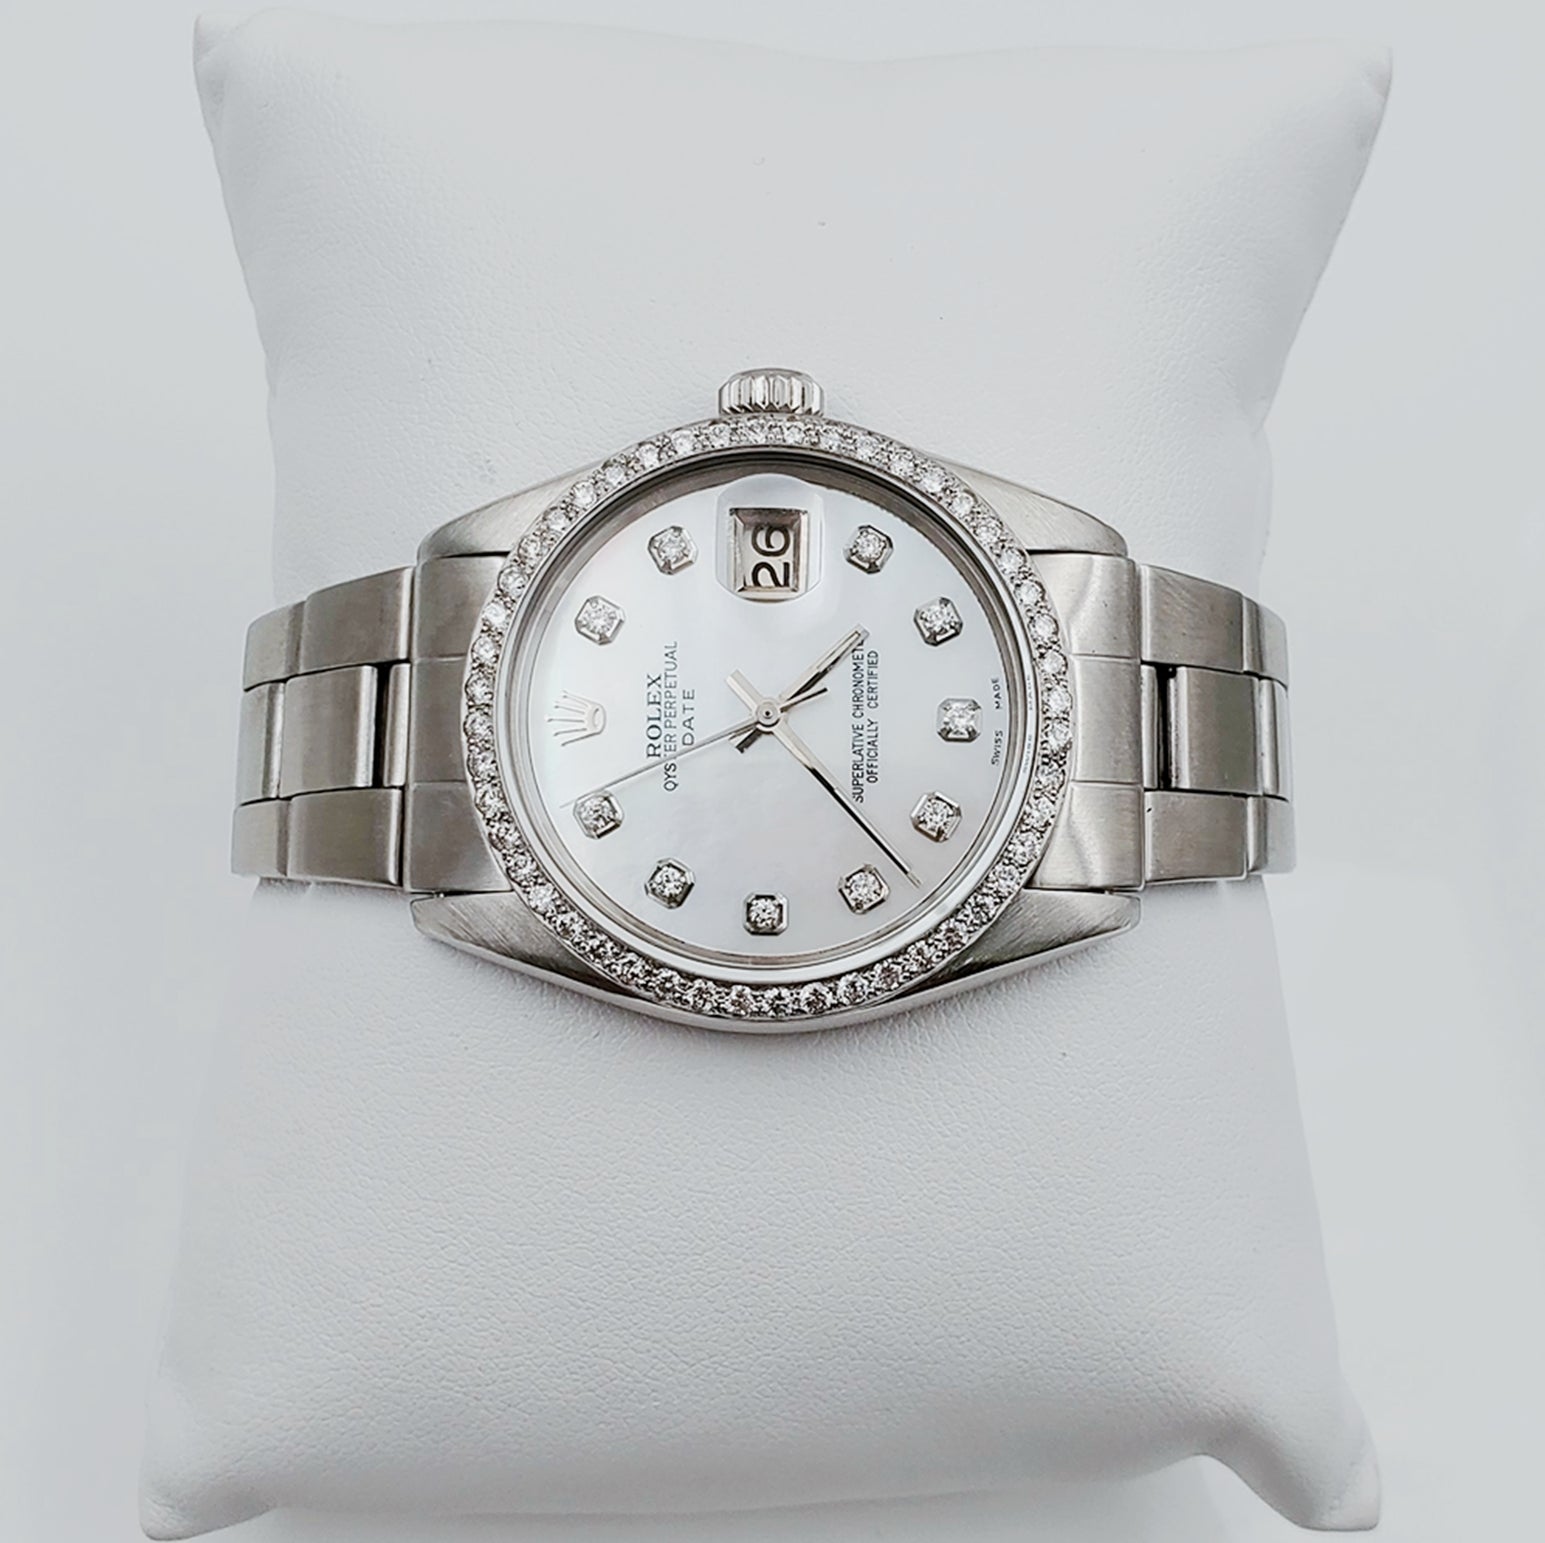 Men's Rolex 36mm Vintage DateJust Stainless Steel Oyster Band Watch with Mother of Pearl Diamond Dial and 18K White Gold Diamond Bezel. (Pre-Owned)